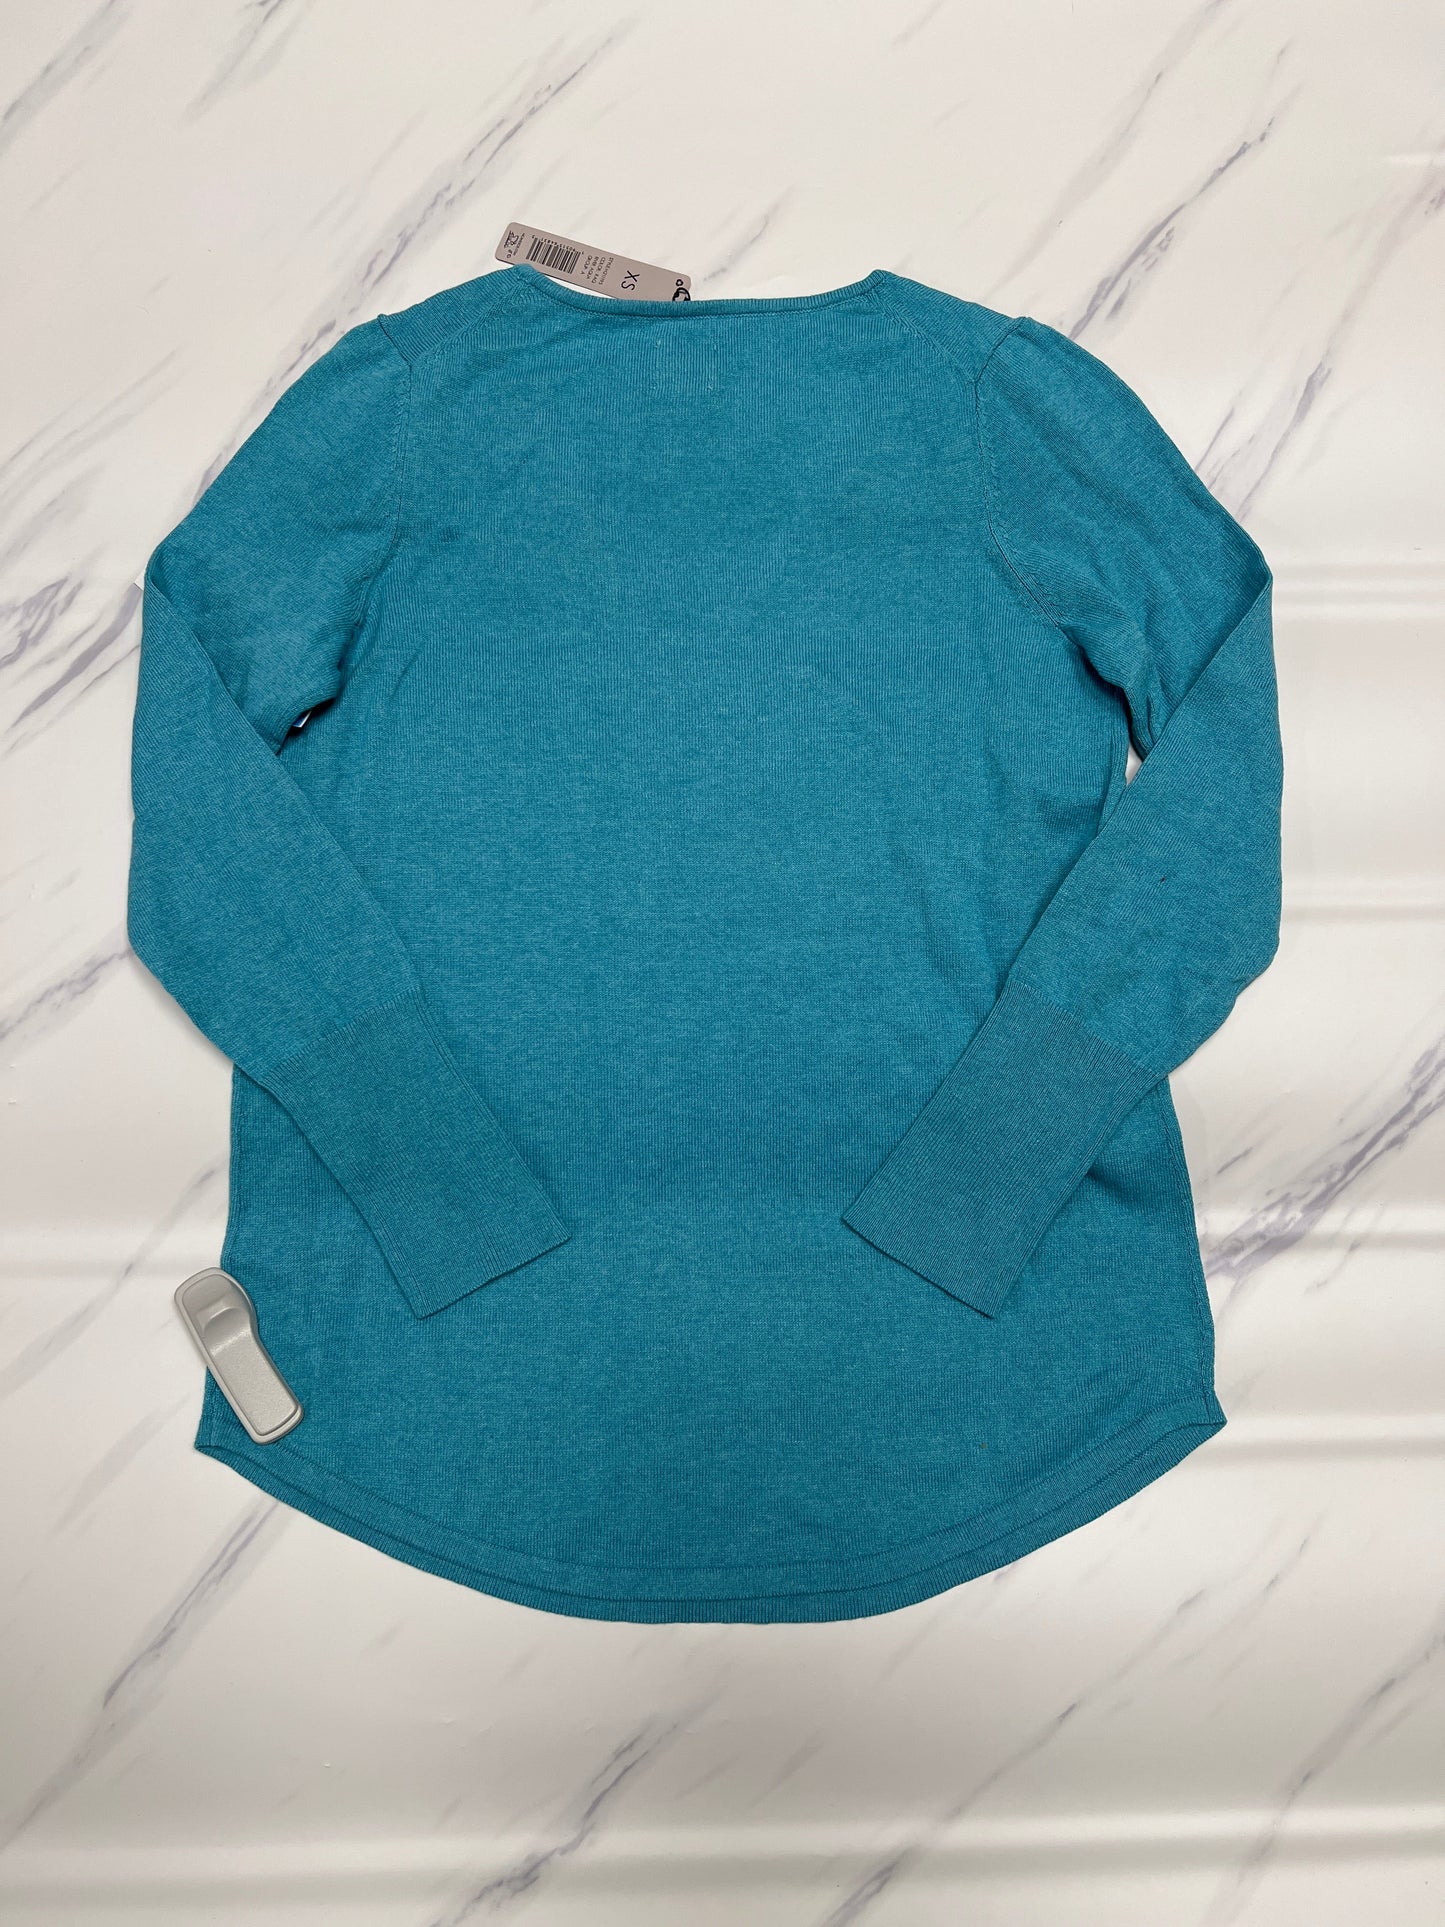 Sweater By Nic + Zoe  Size: S